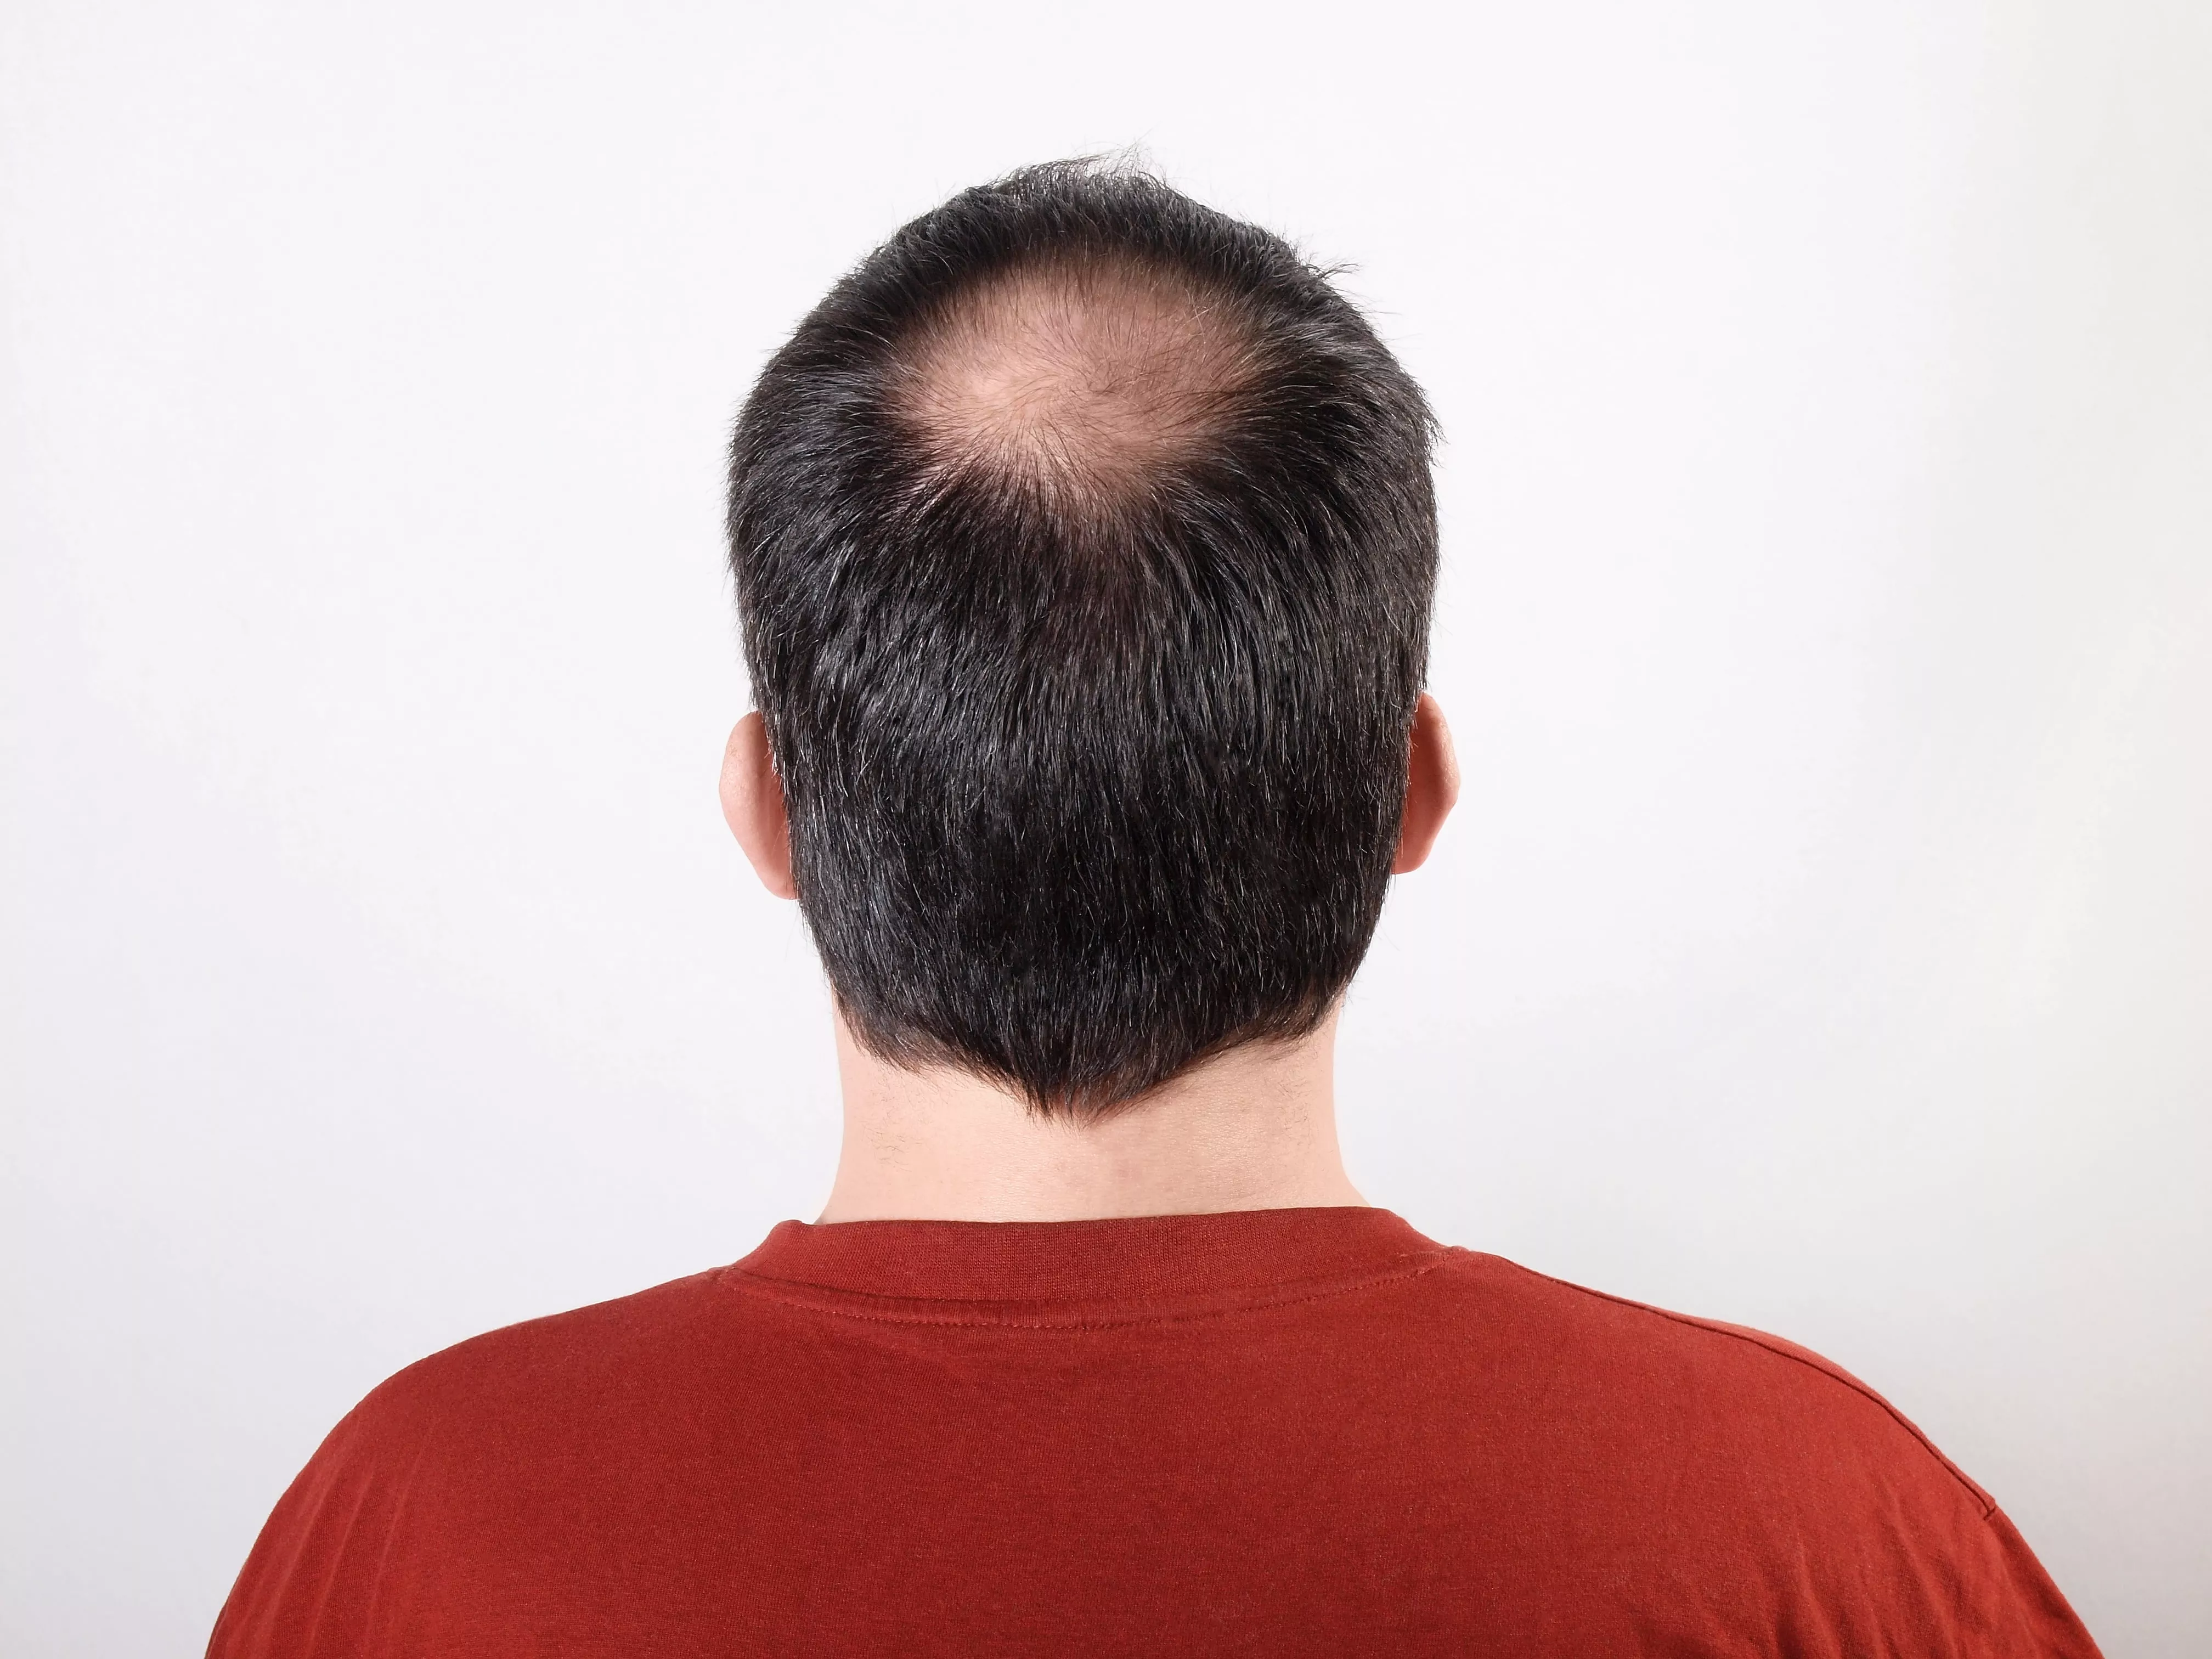 Everything You Need to Know about Hair Transplantation